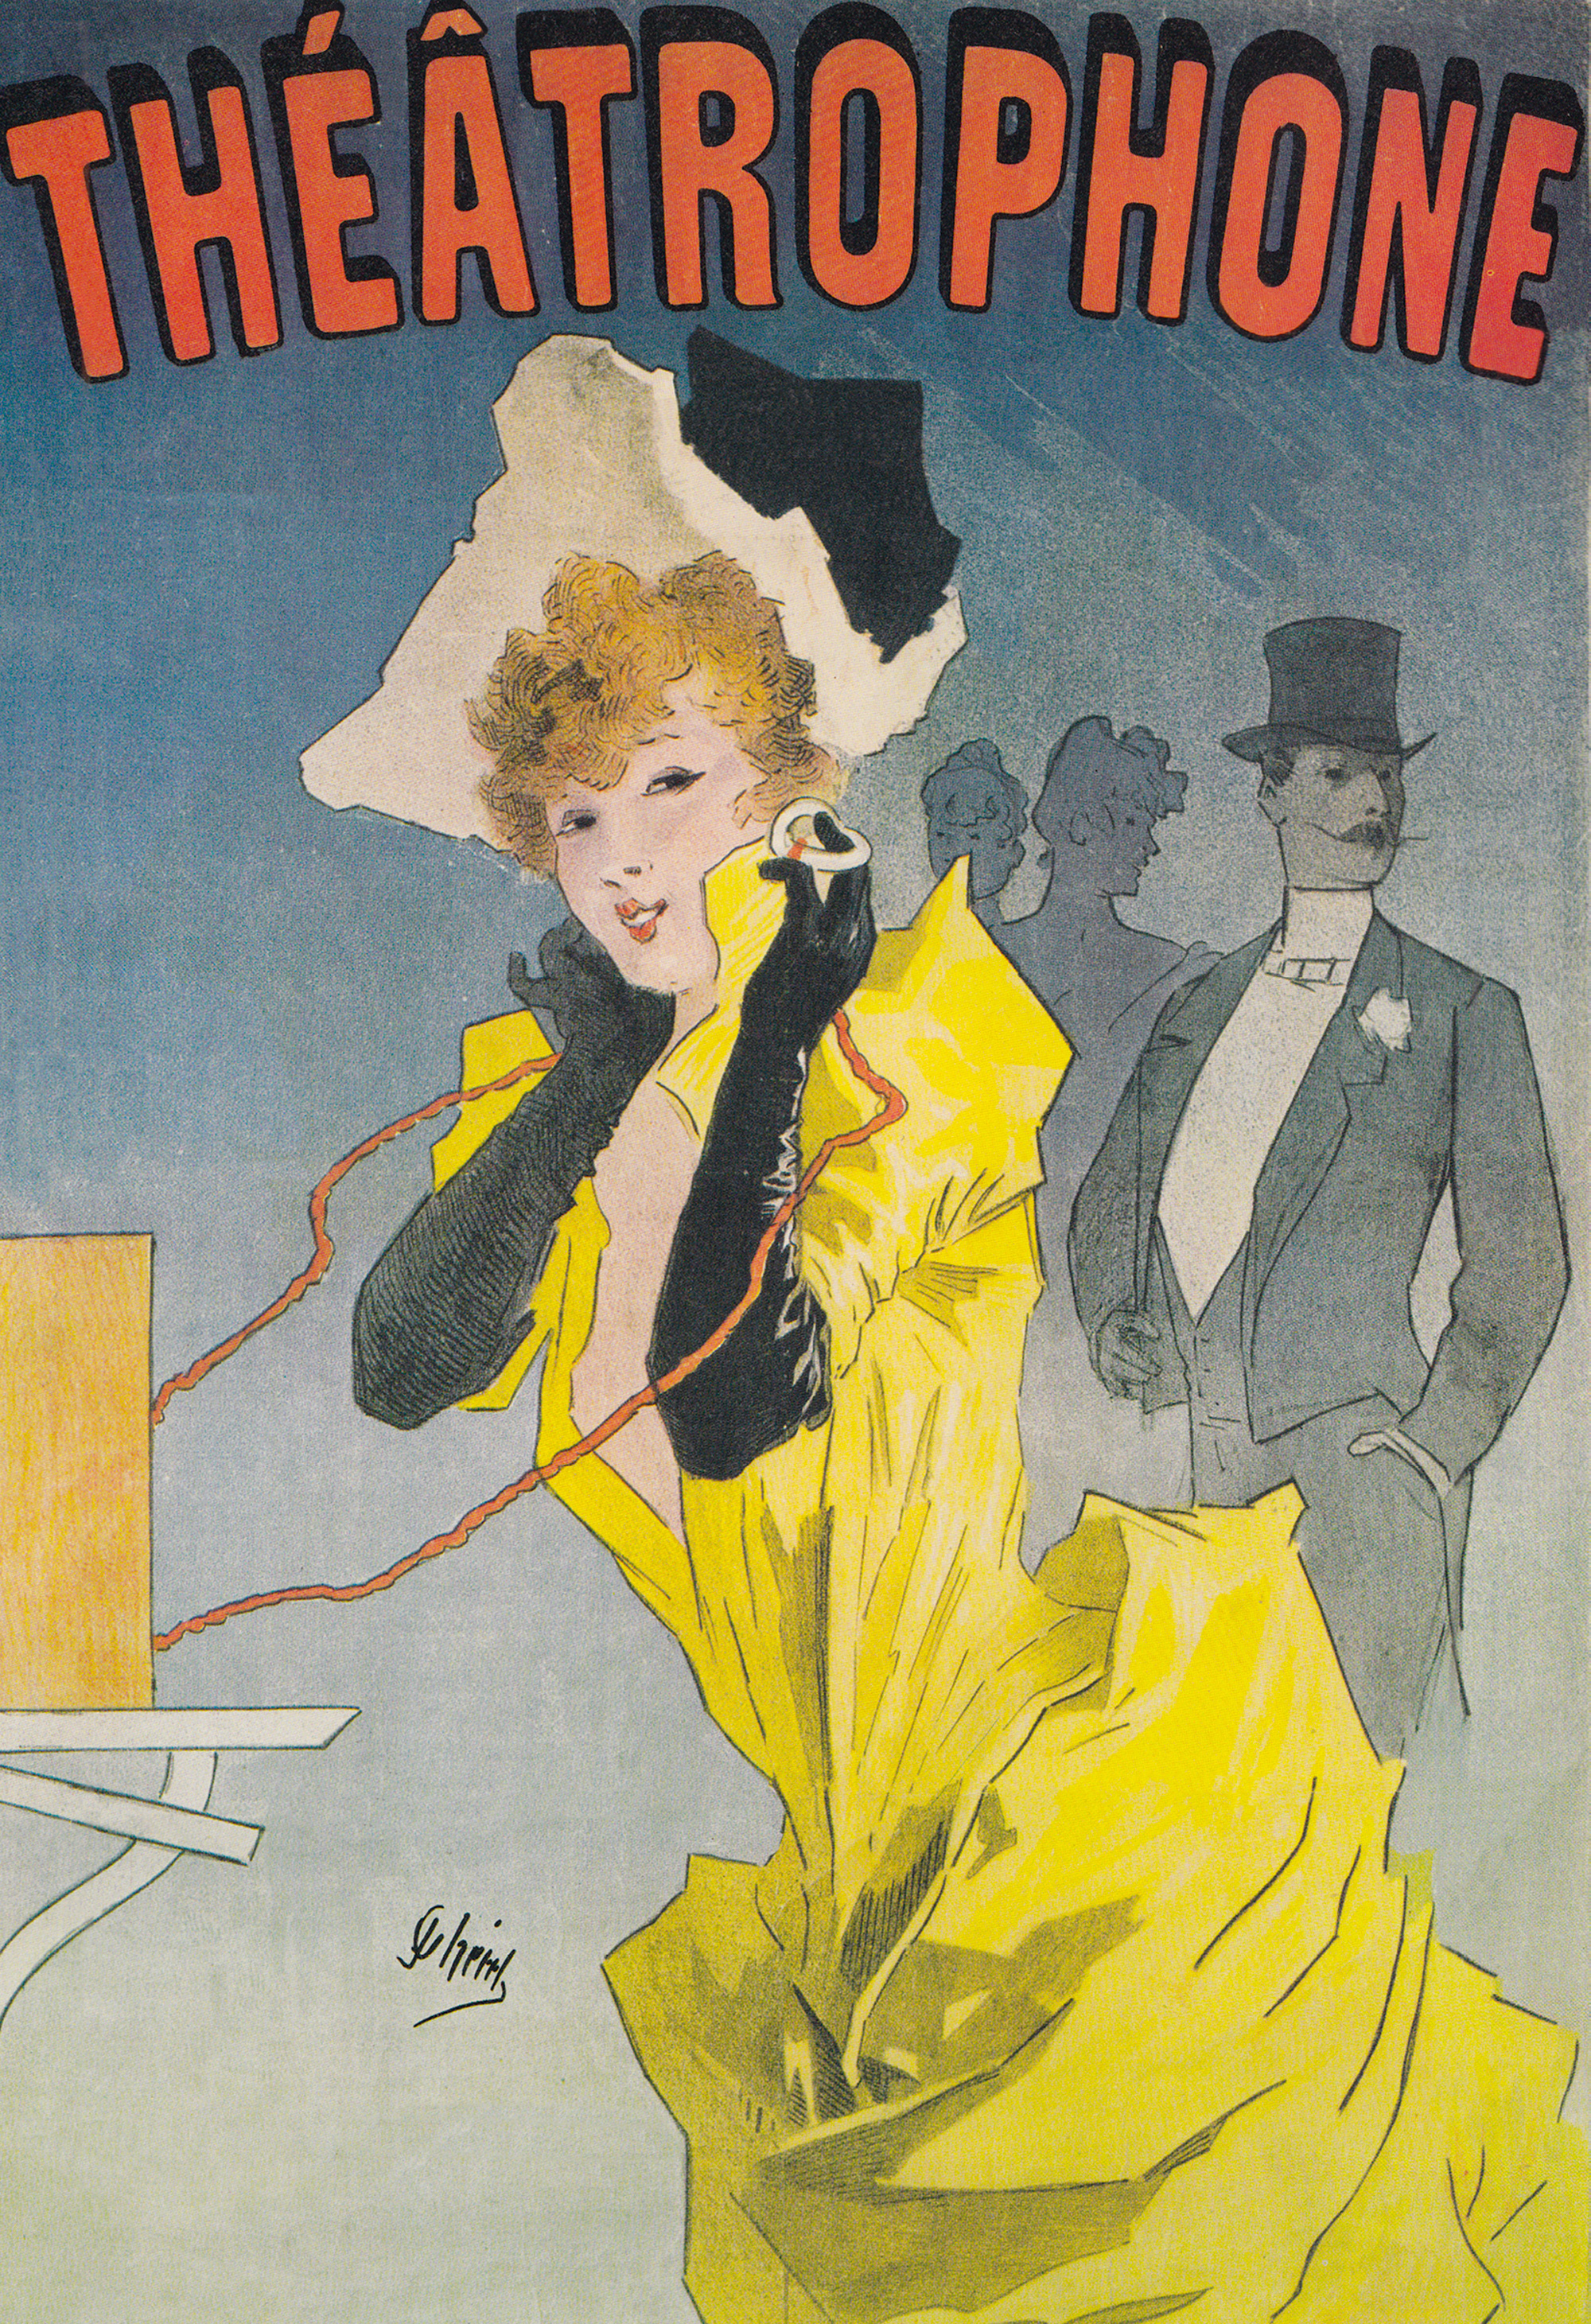 A chic Parisian dials in. Jules Cheret’s poster for the launch of the new Compagnie du Théâtrophone, 1890.